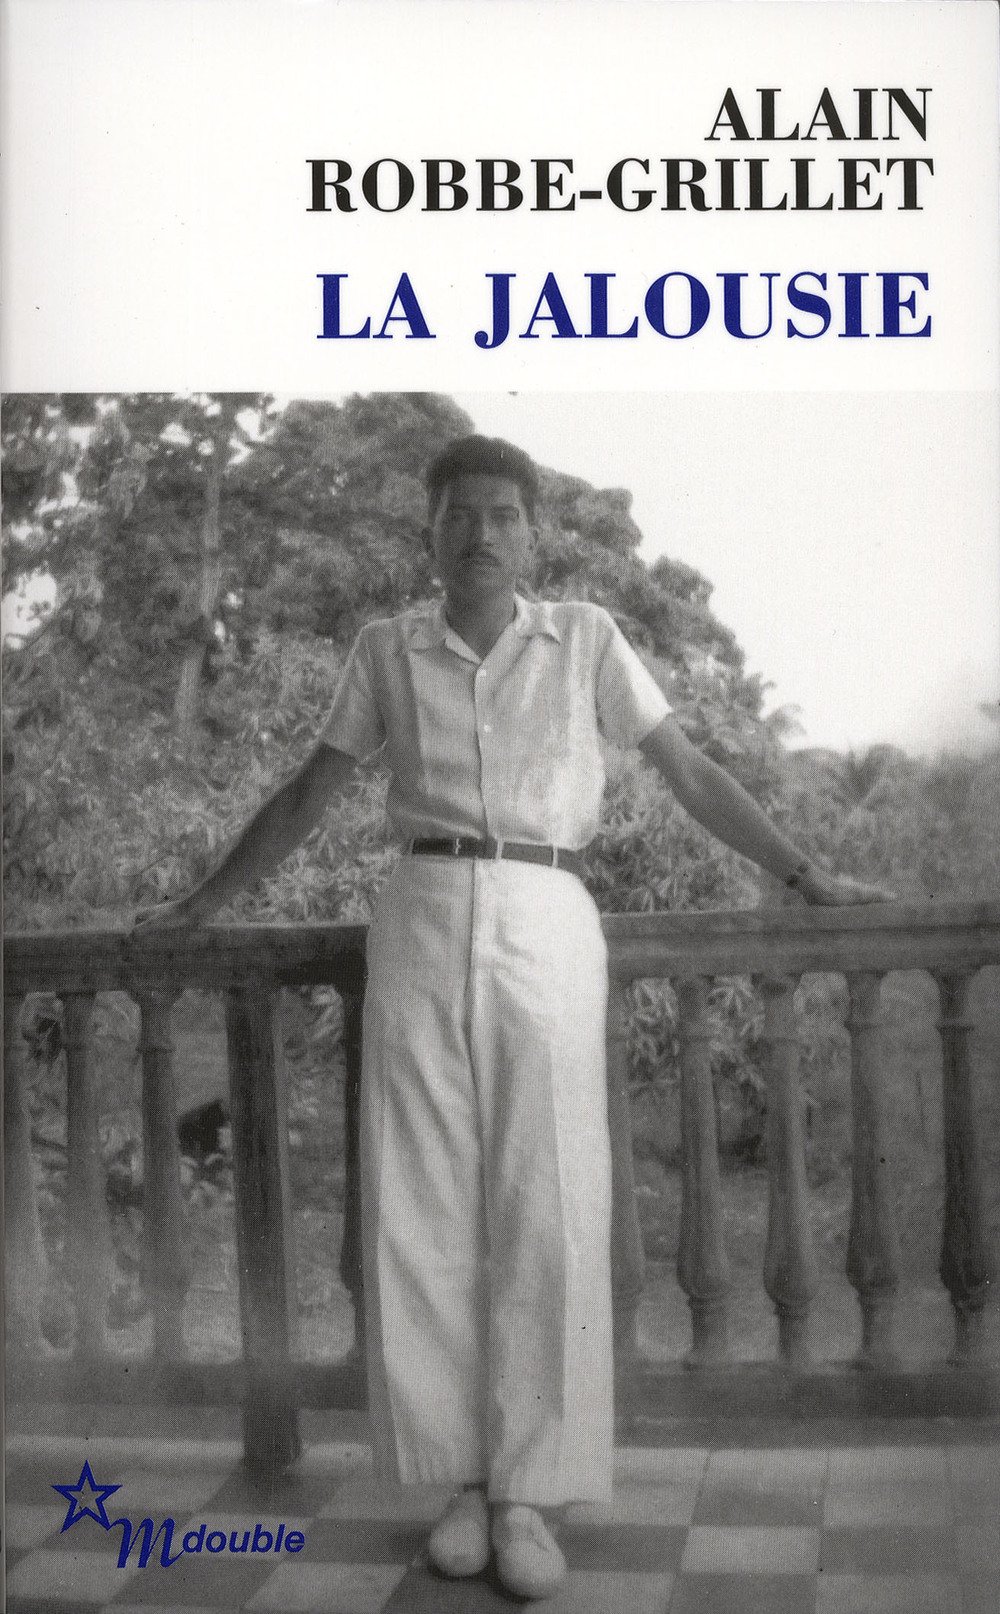 alain robbe grillet for a new novel pdf